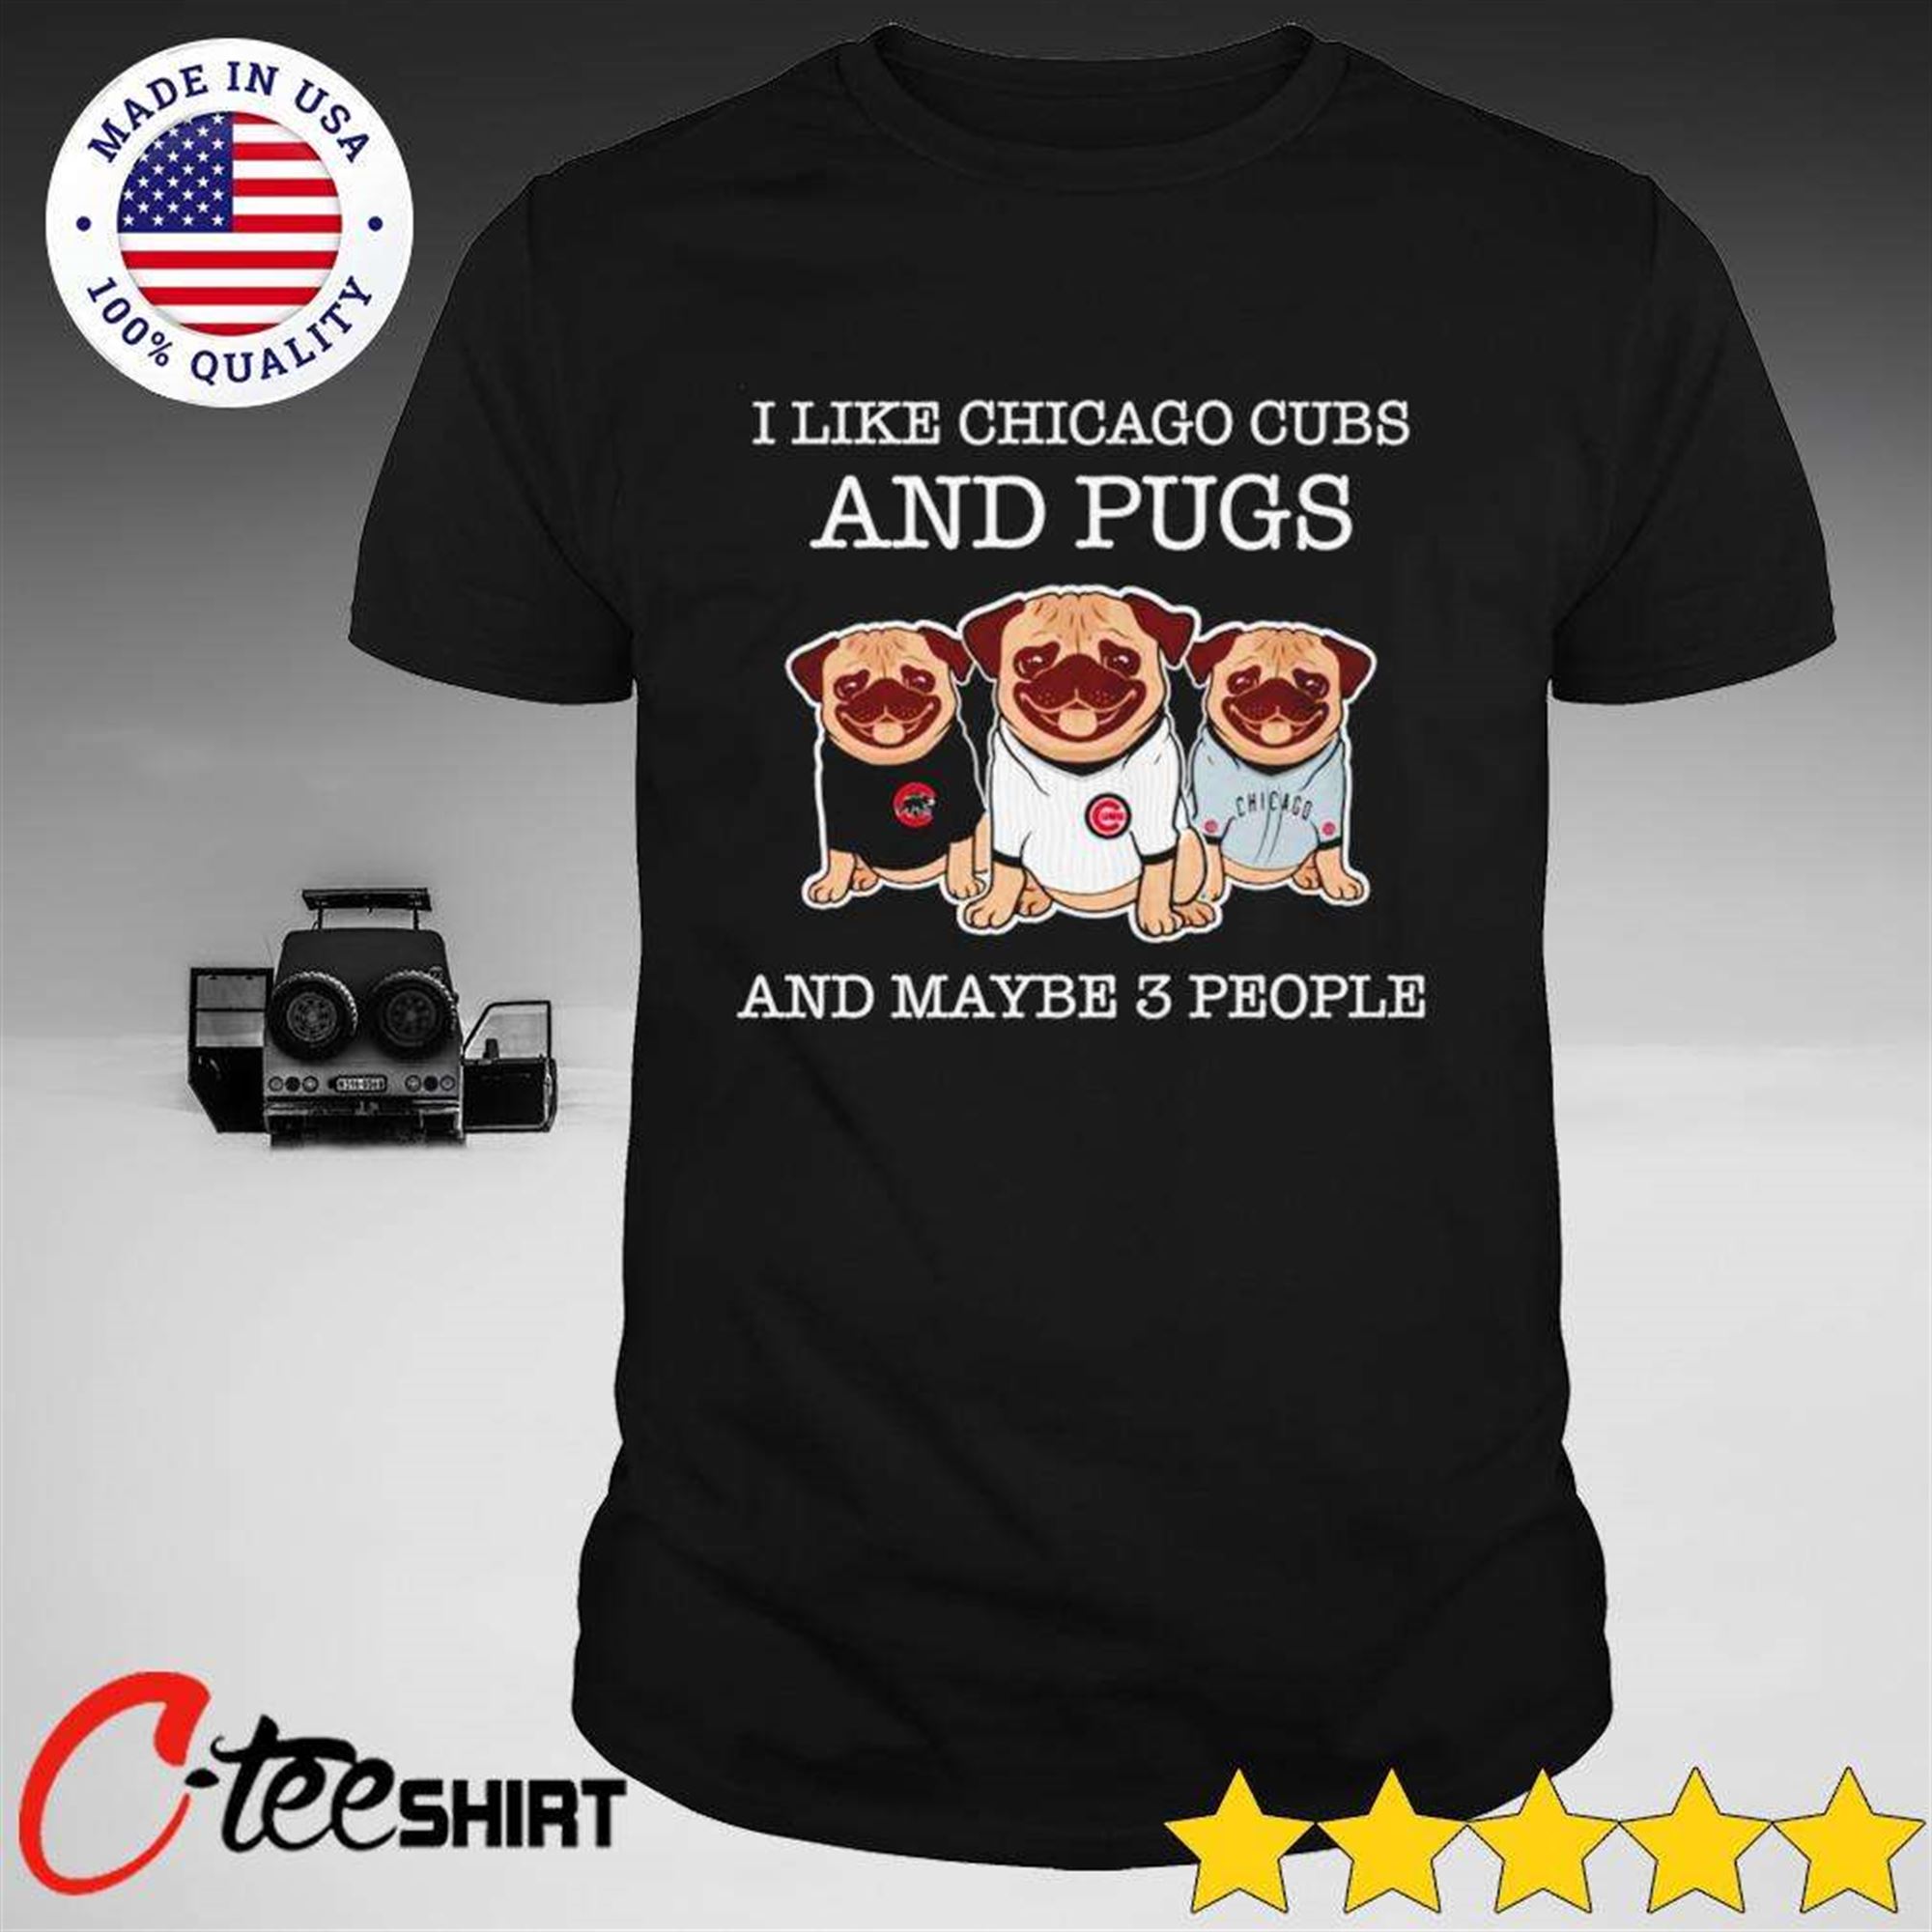 I Like Chicago Cubs And Pugs And Maybe 3 People T-shirt Size Up To 5xl